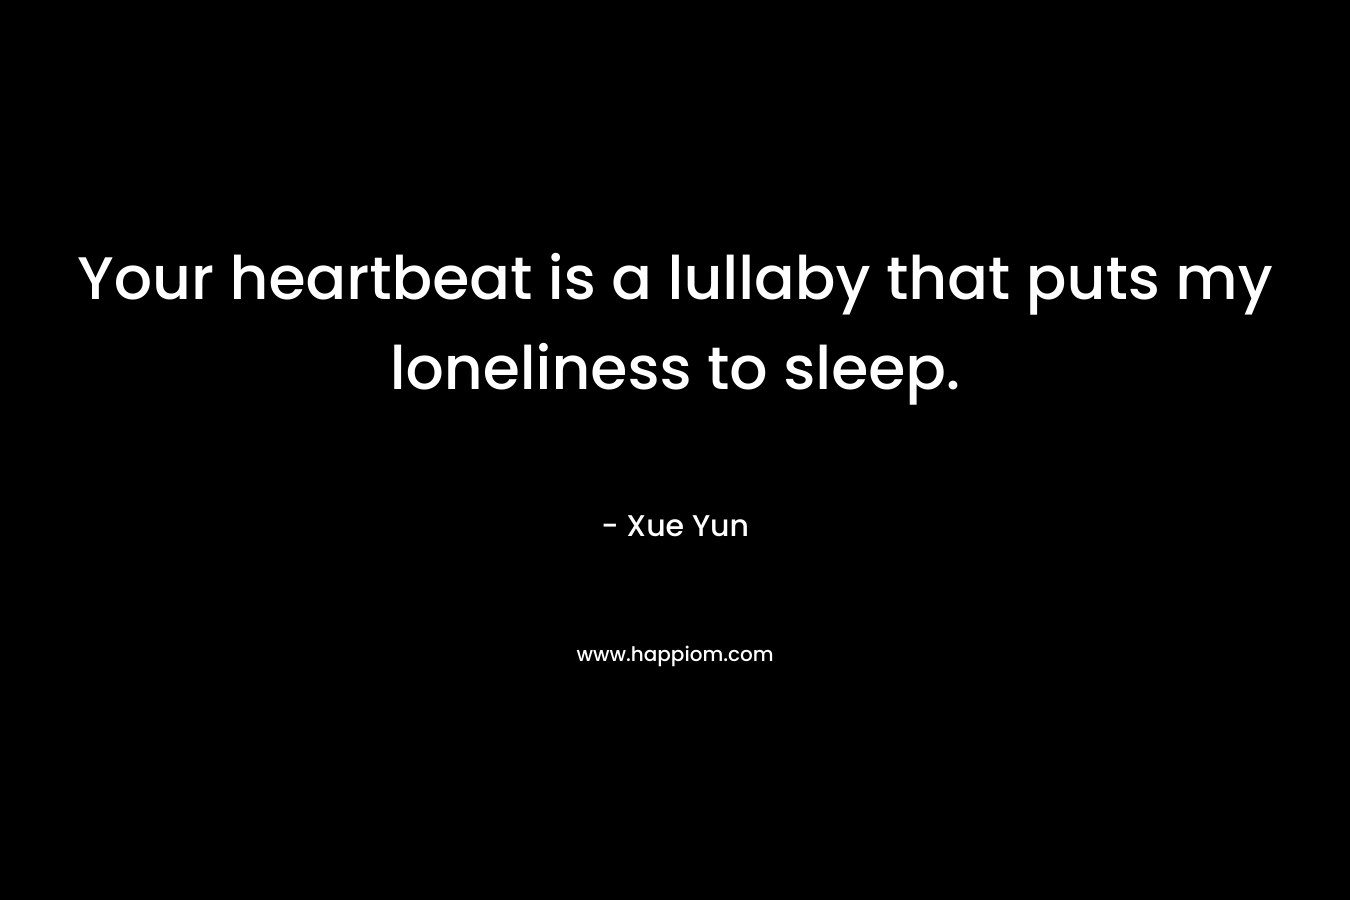 Your heartbeat is a lullaby that puts my loneliness to sleep.